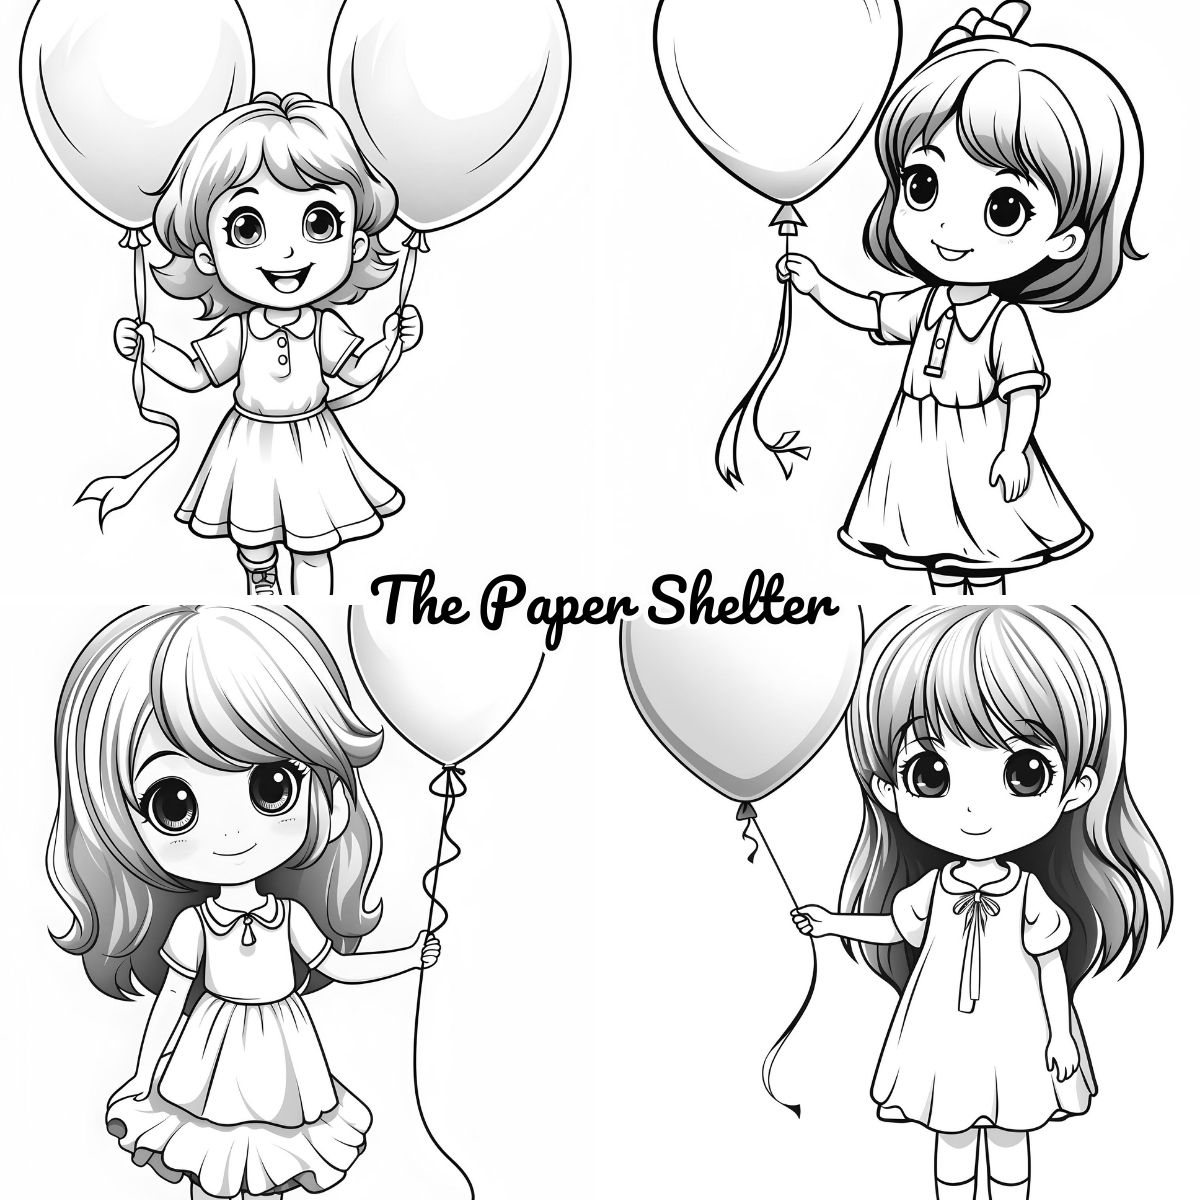 Balloons Of Bliss - Digital Coloring Book